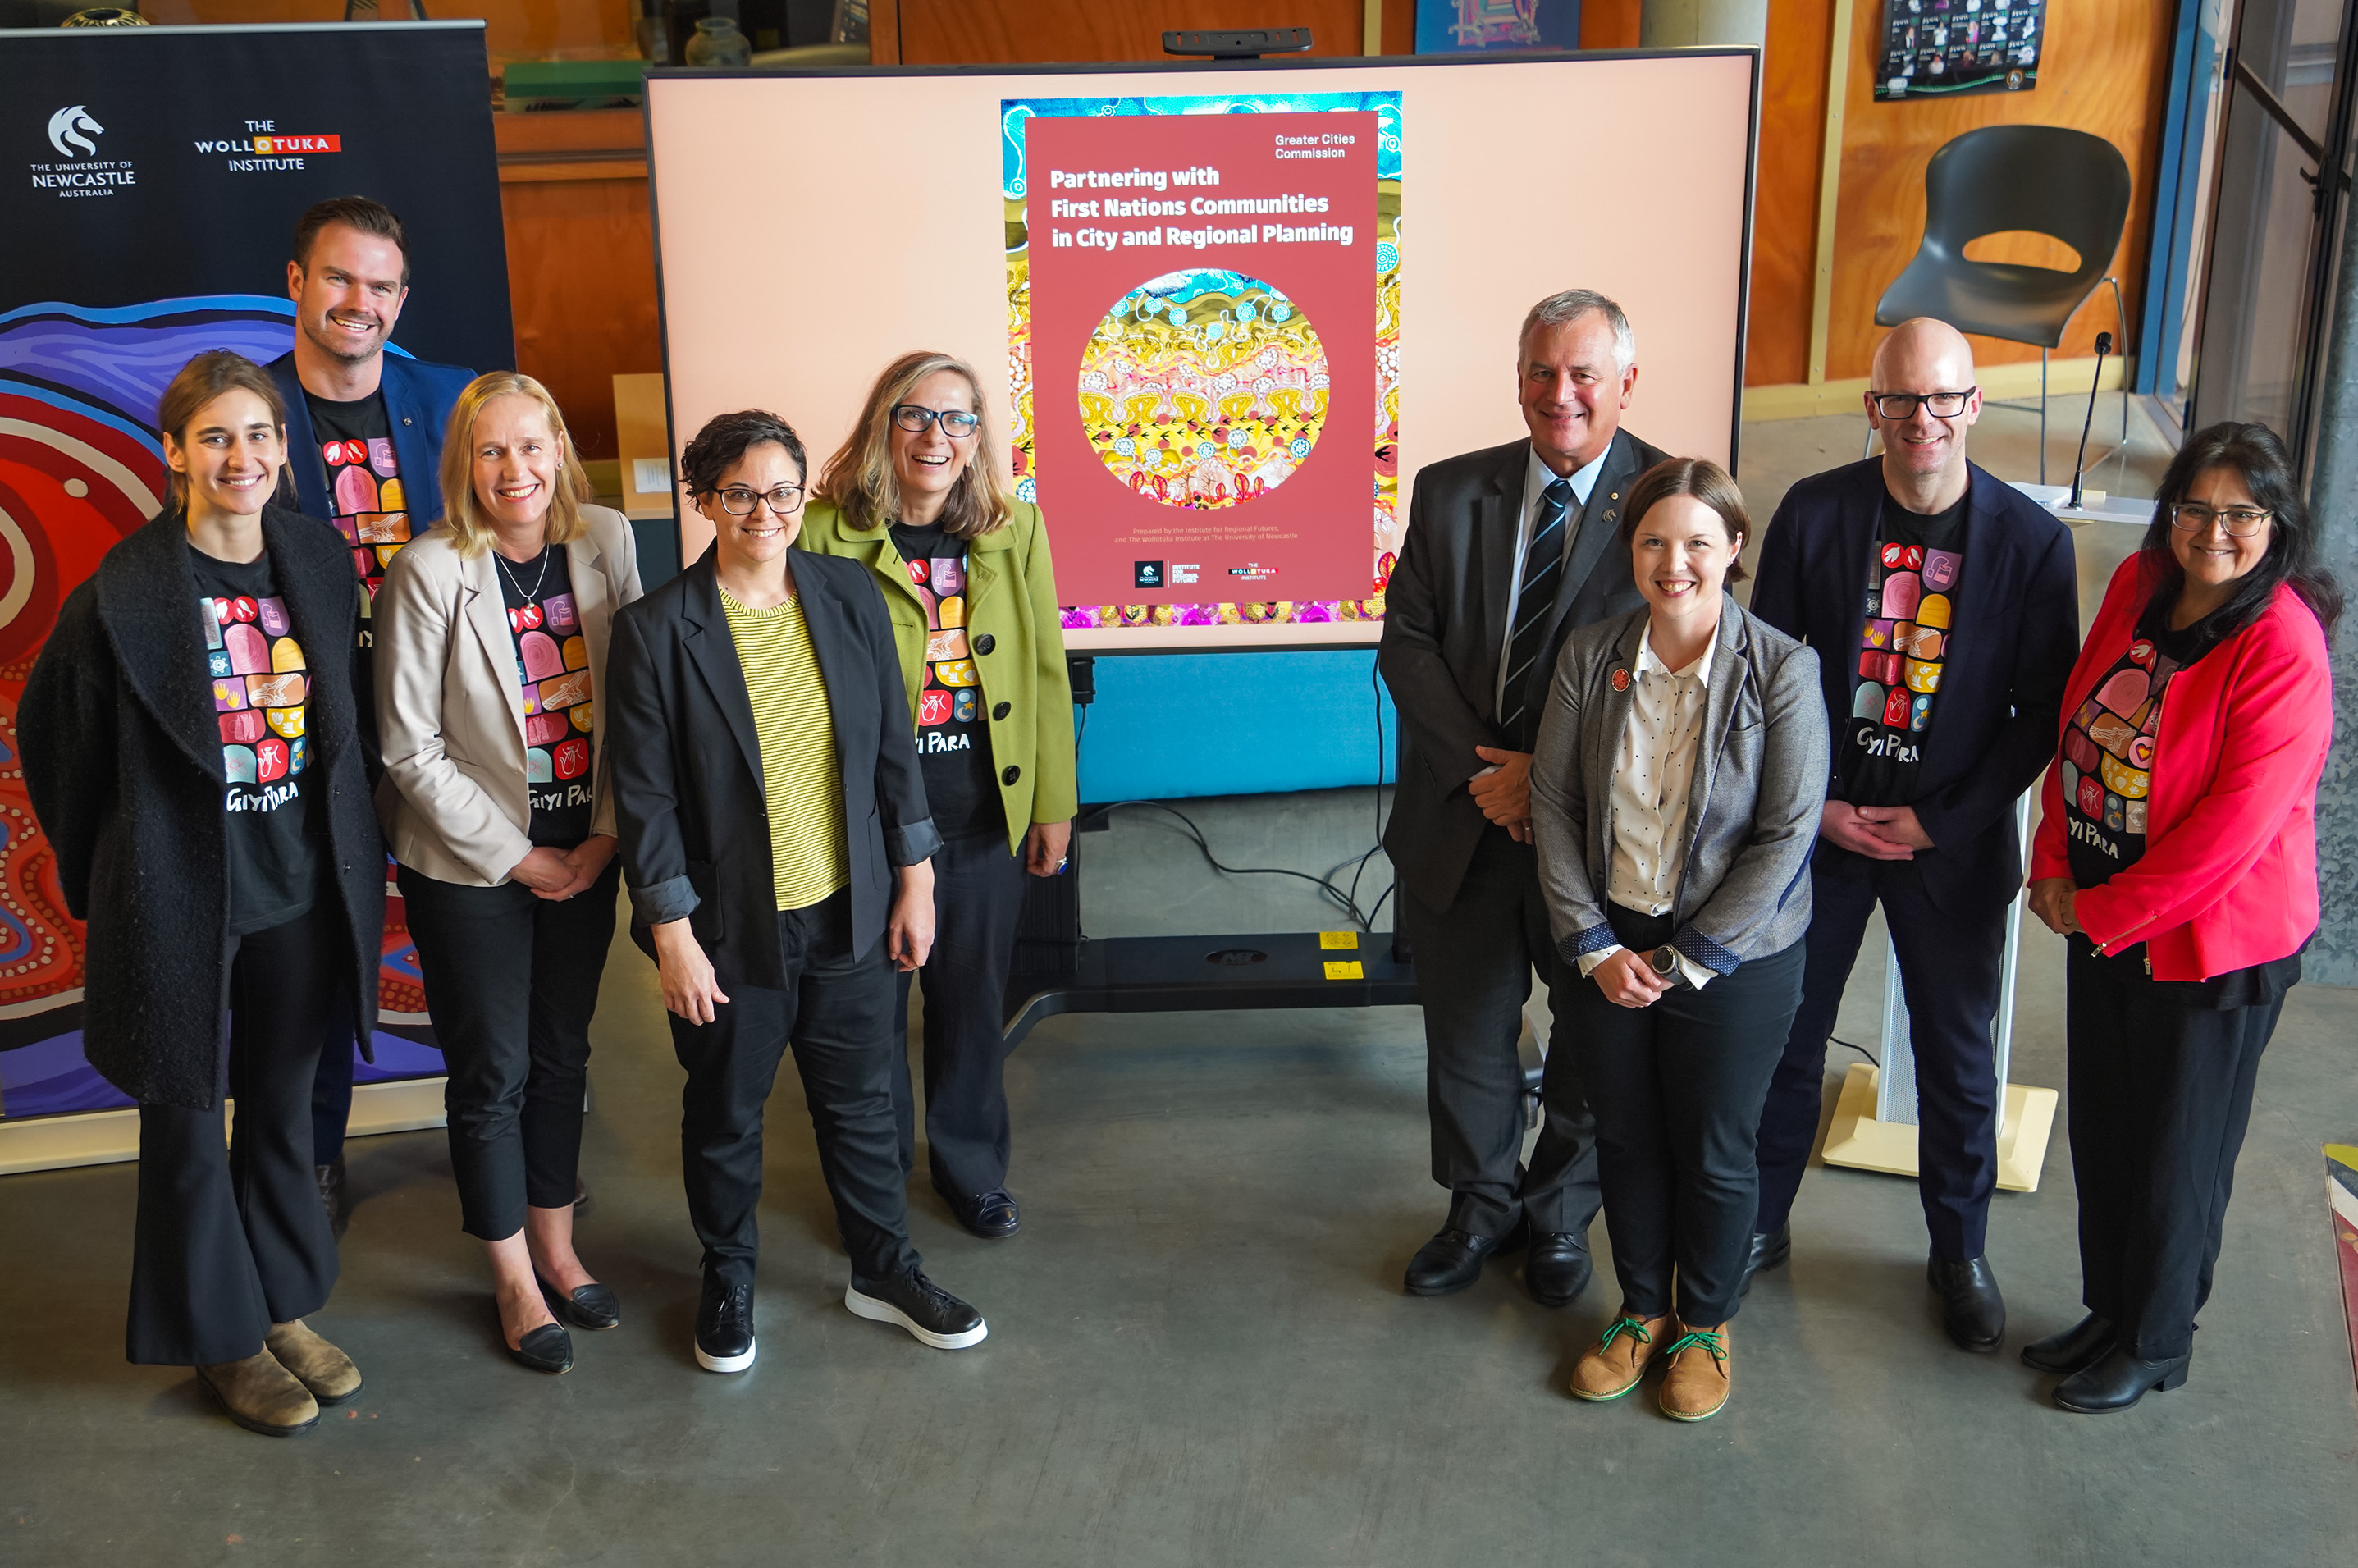 Members from the Greater Cities Commission, in partnership with University of Newcastle's Wollotuka Institute and the Institute for Regional Futures group together for a photo at the launch